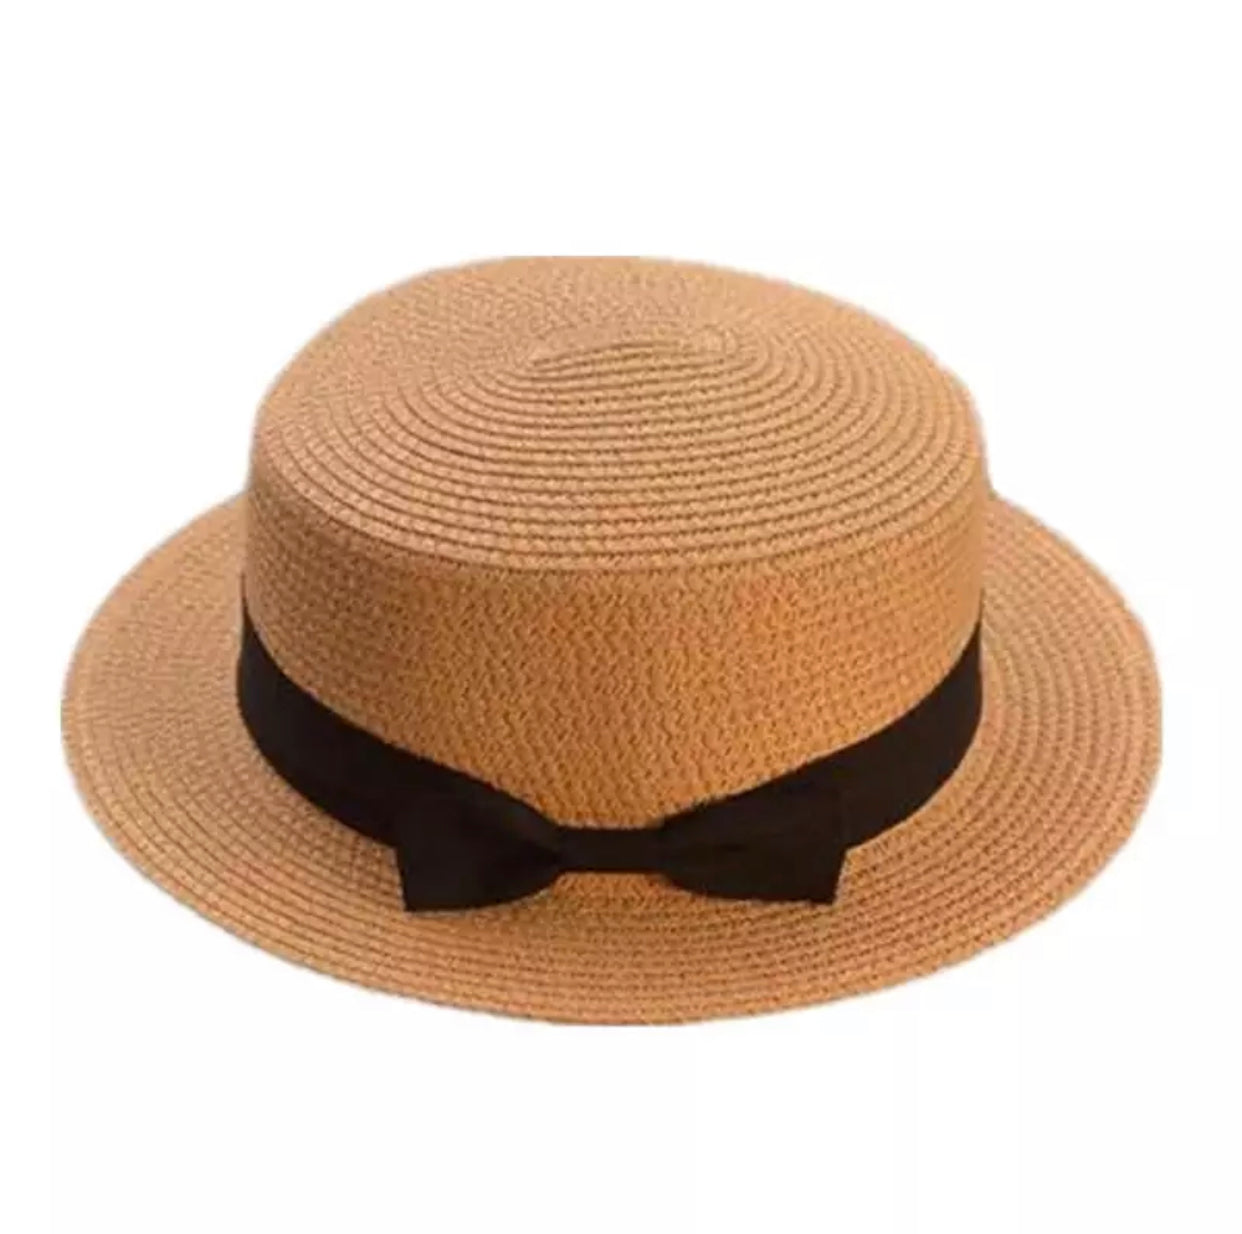 Straw Hat for Toddlers Kids